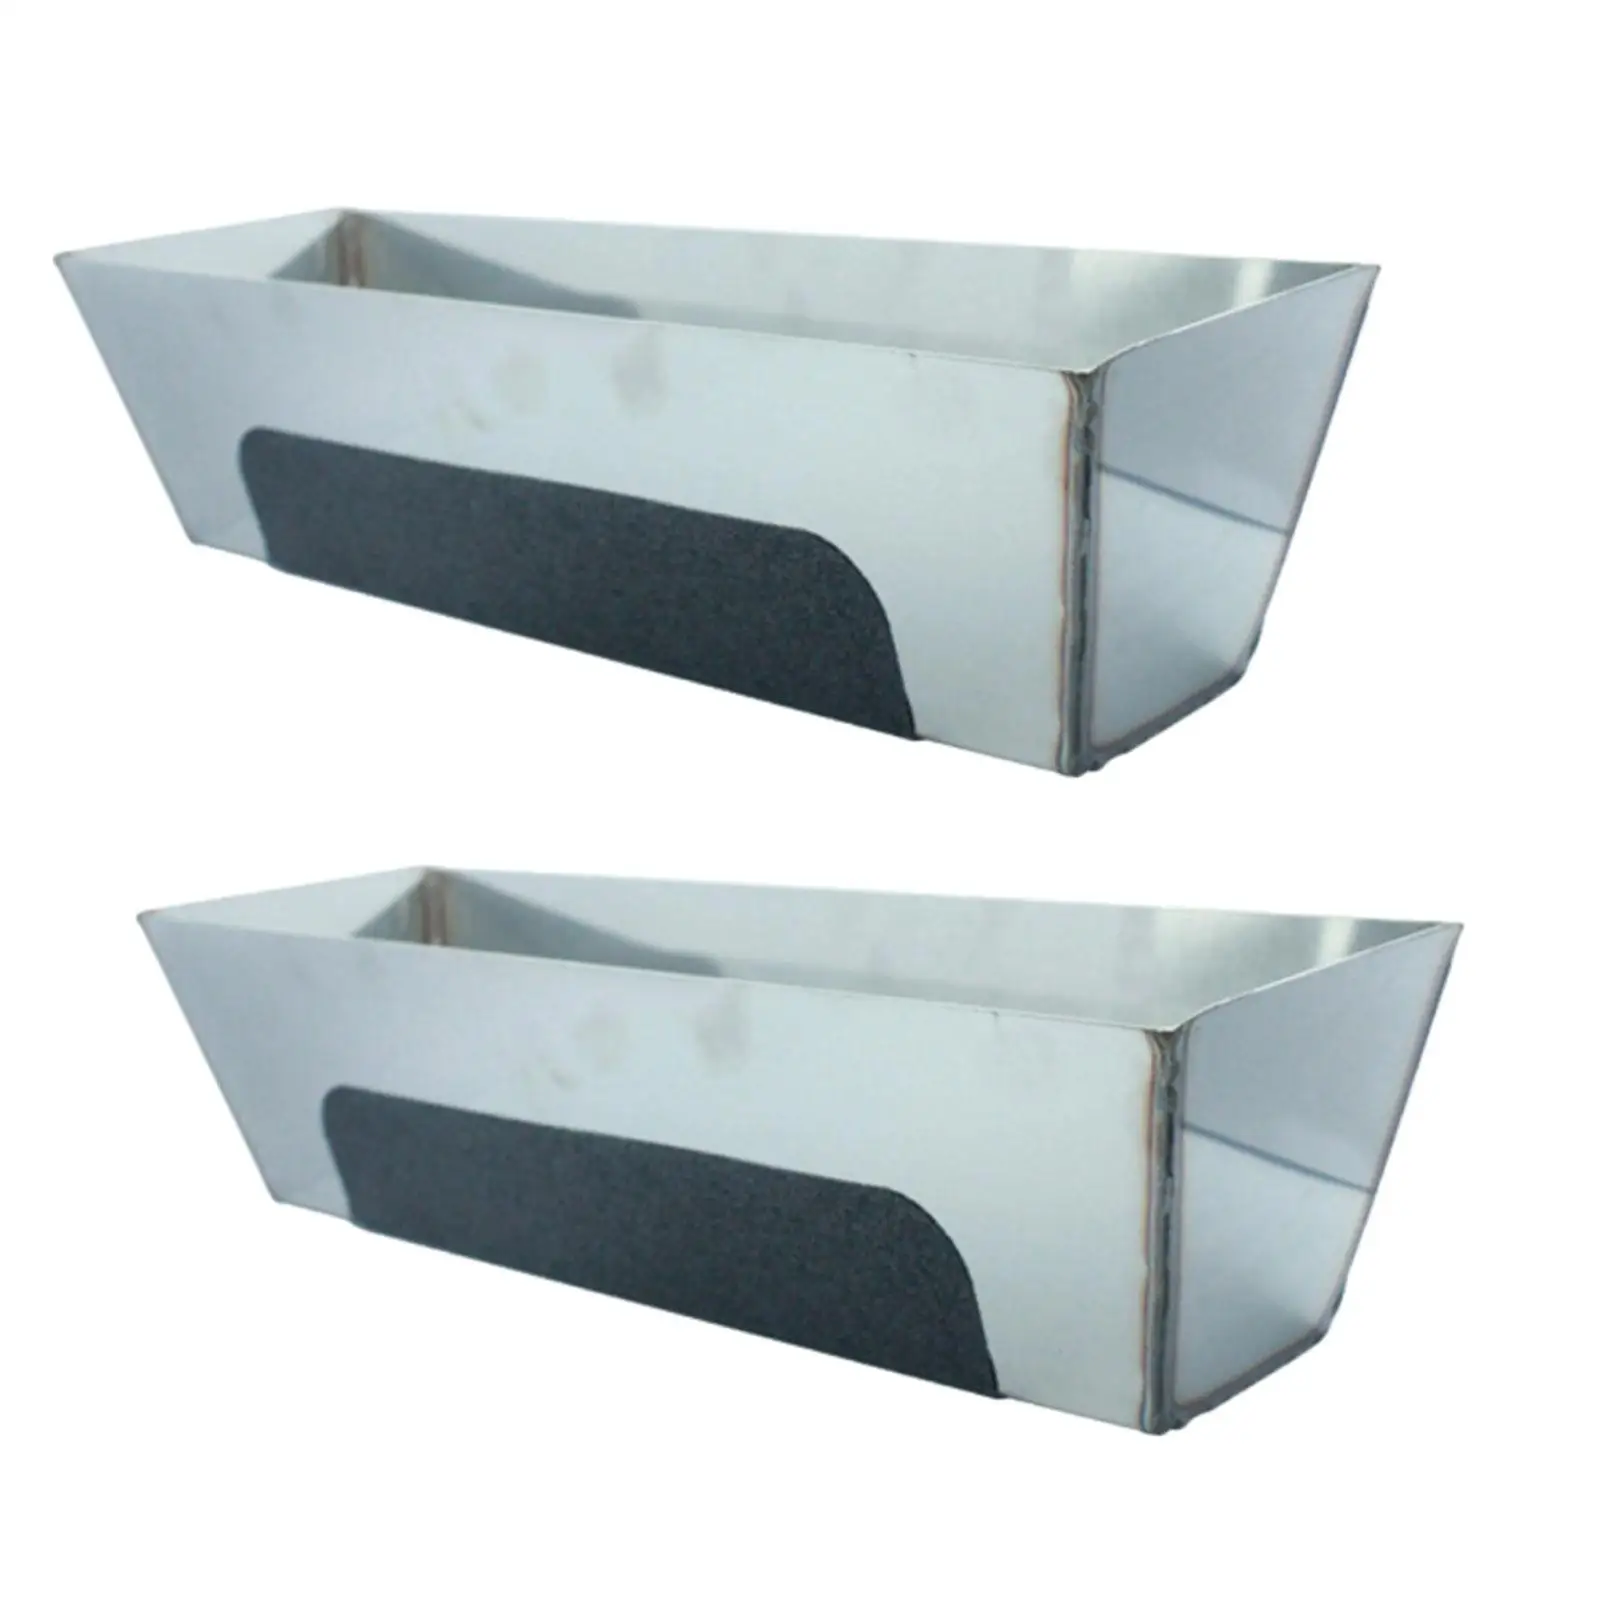 Stainless Steel Mud Pan Sheared Sides Bucket Tray Metal Fittings Drywall Durable Plastering Plasterers for Easy Knife Cleaning